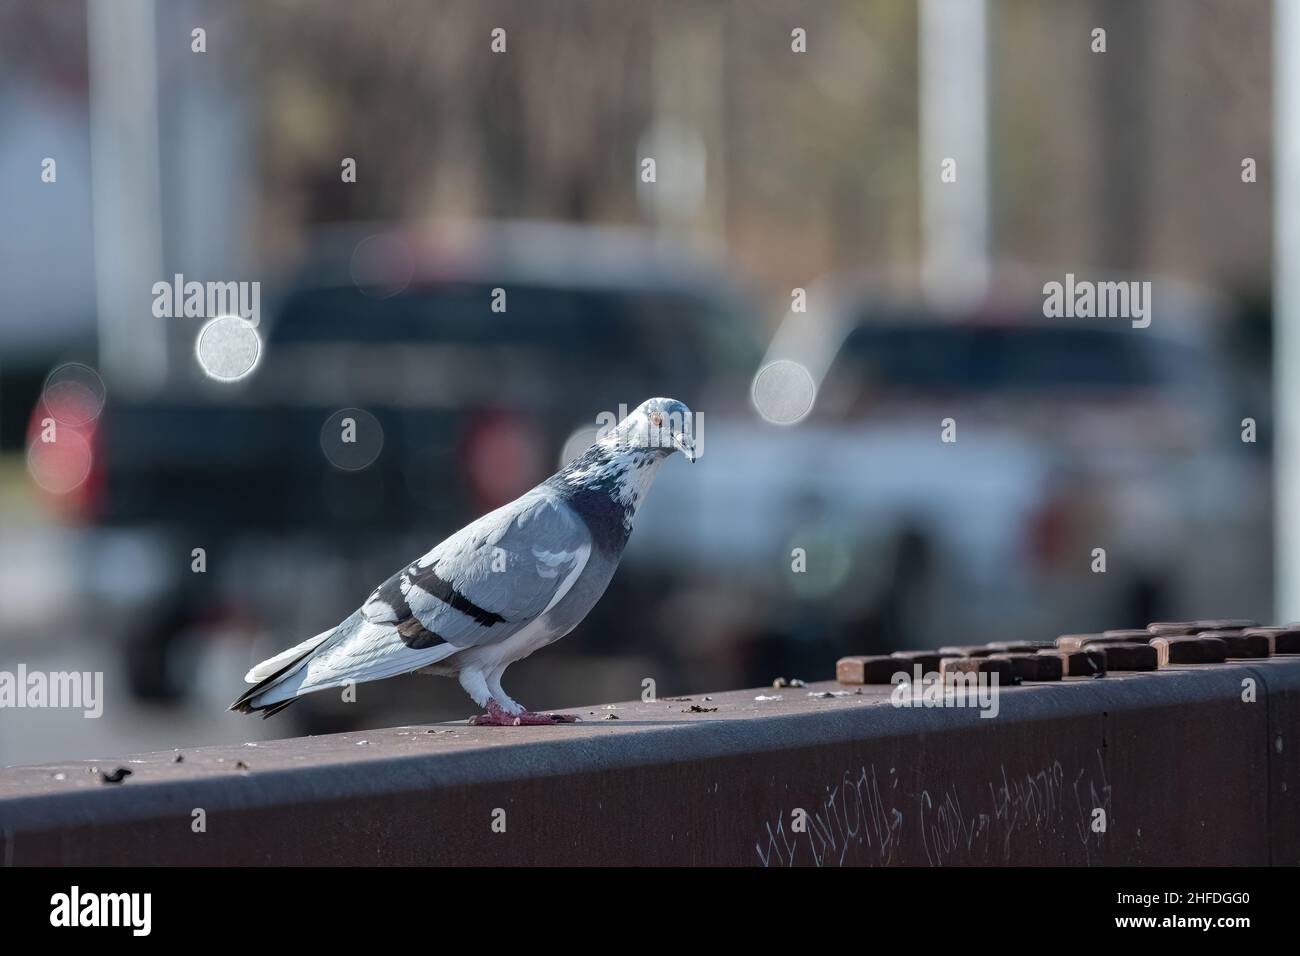 A Rock Pigeon perched on the metal rail of an bridge in an urban city as a pair of pickups pass by in the blurry traffic background. Stock Photo